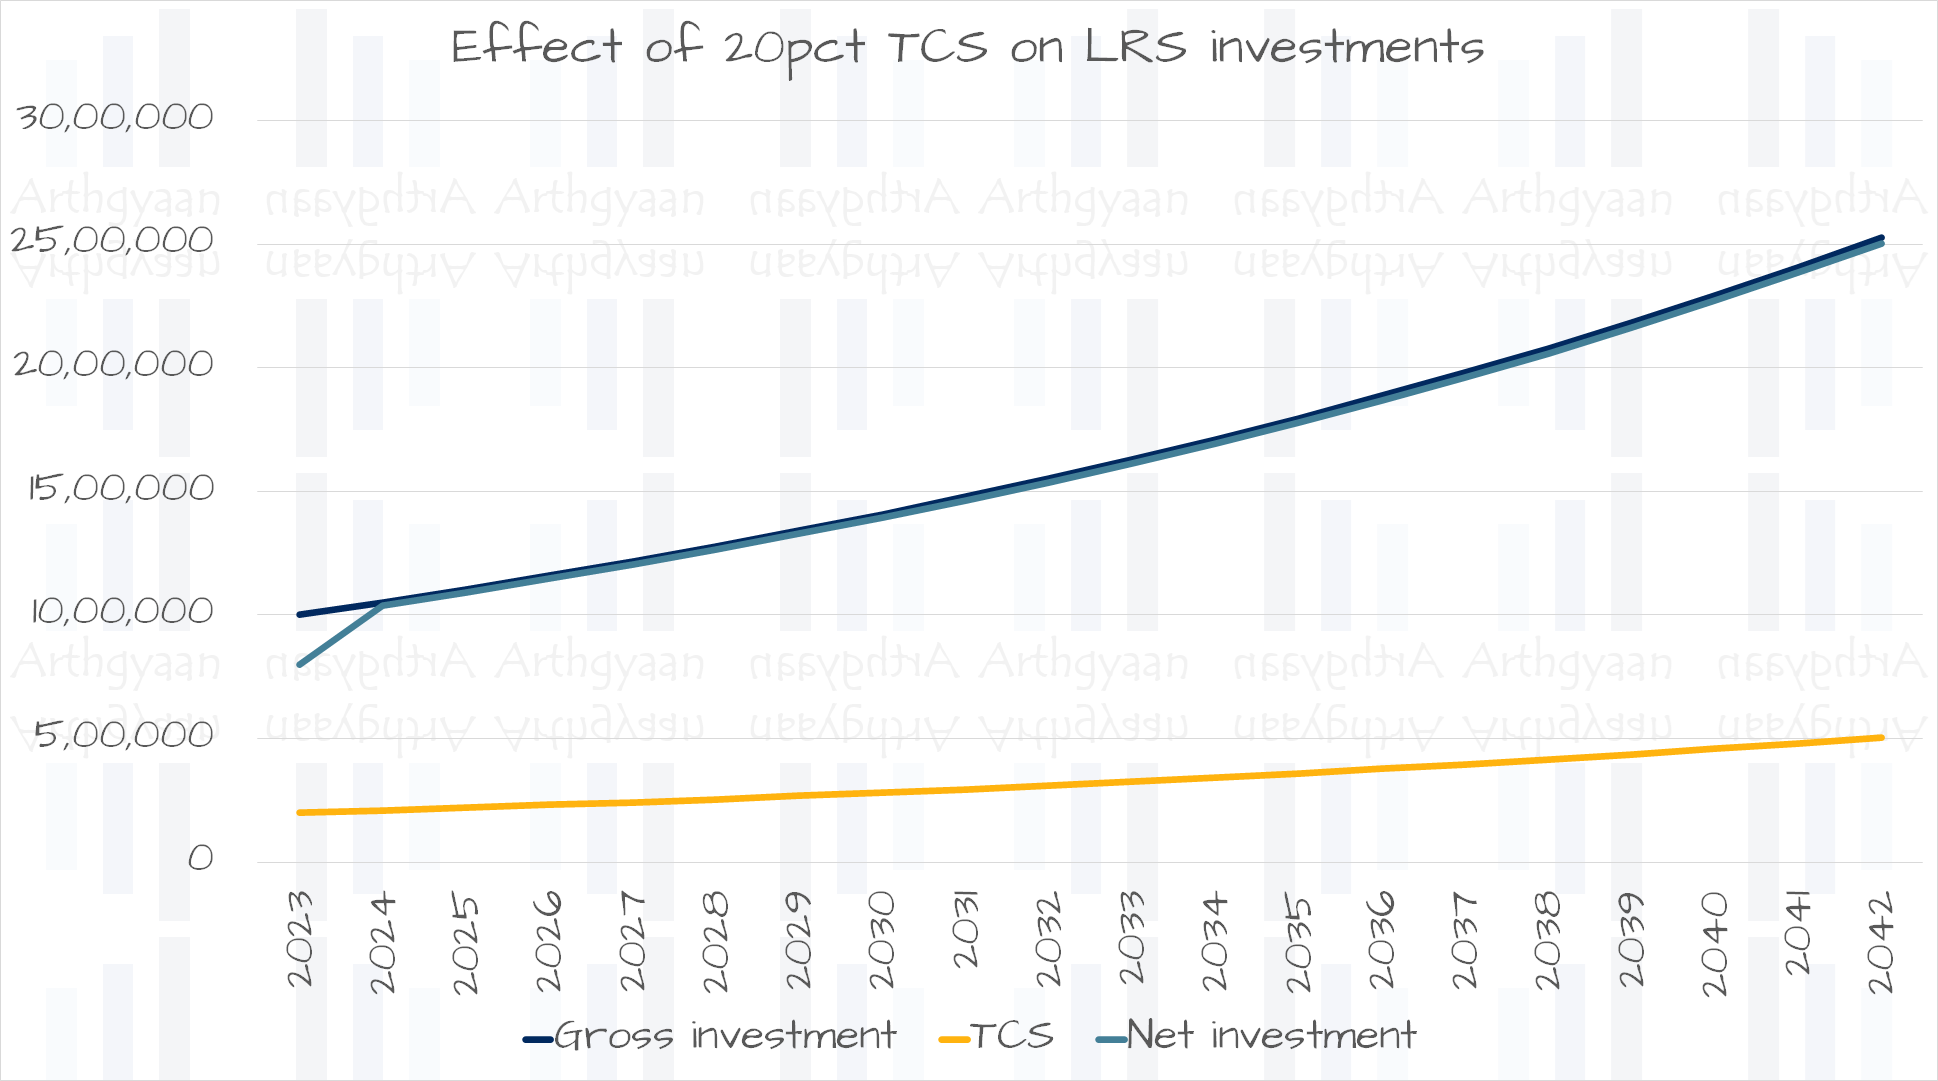 Effect of 20pct TCS on LRS investments